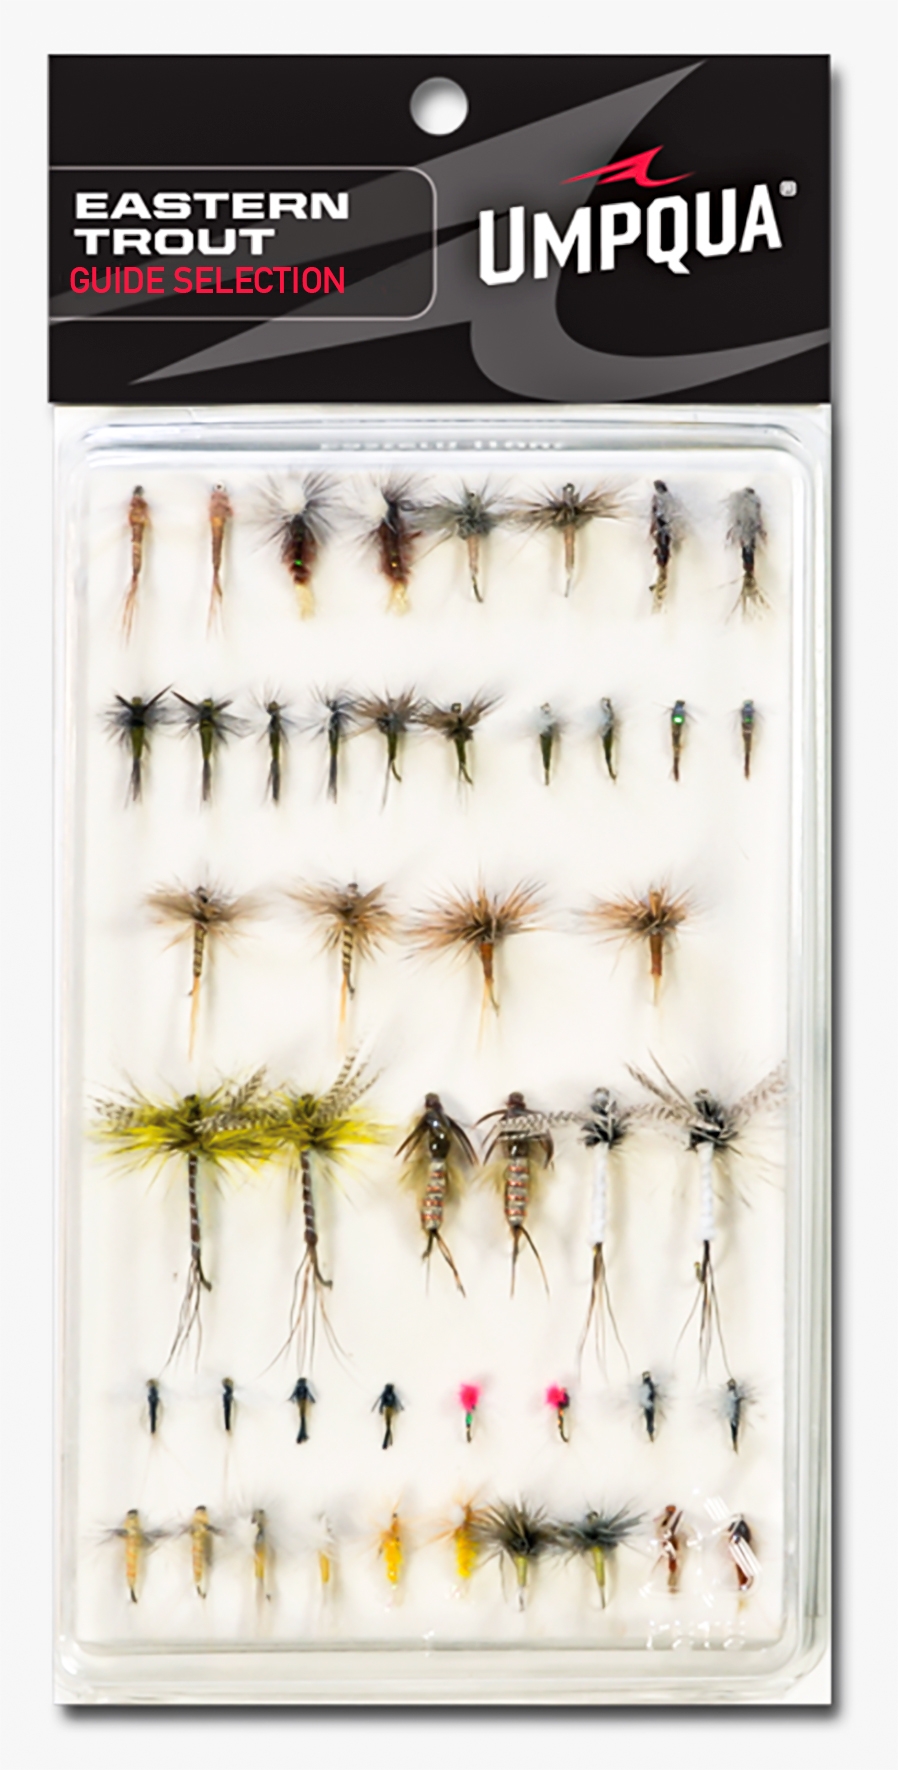 Umpqua's Eastern Trout Fly Selection, premium flies for successful trout fly fishing in Eastern streams and rivers